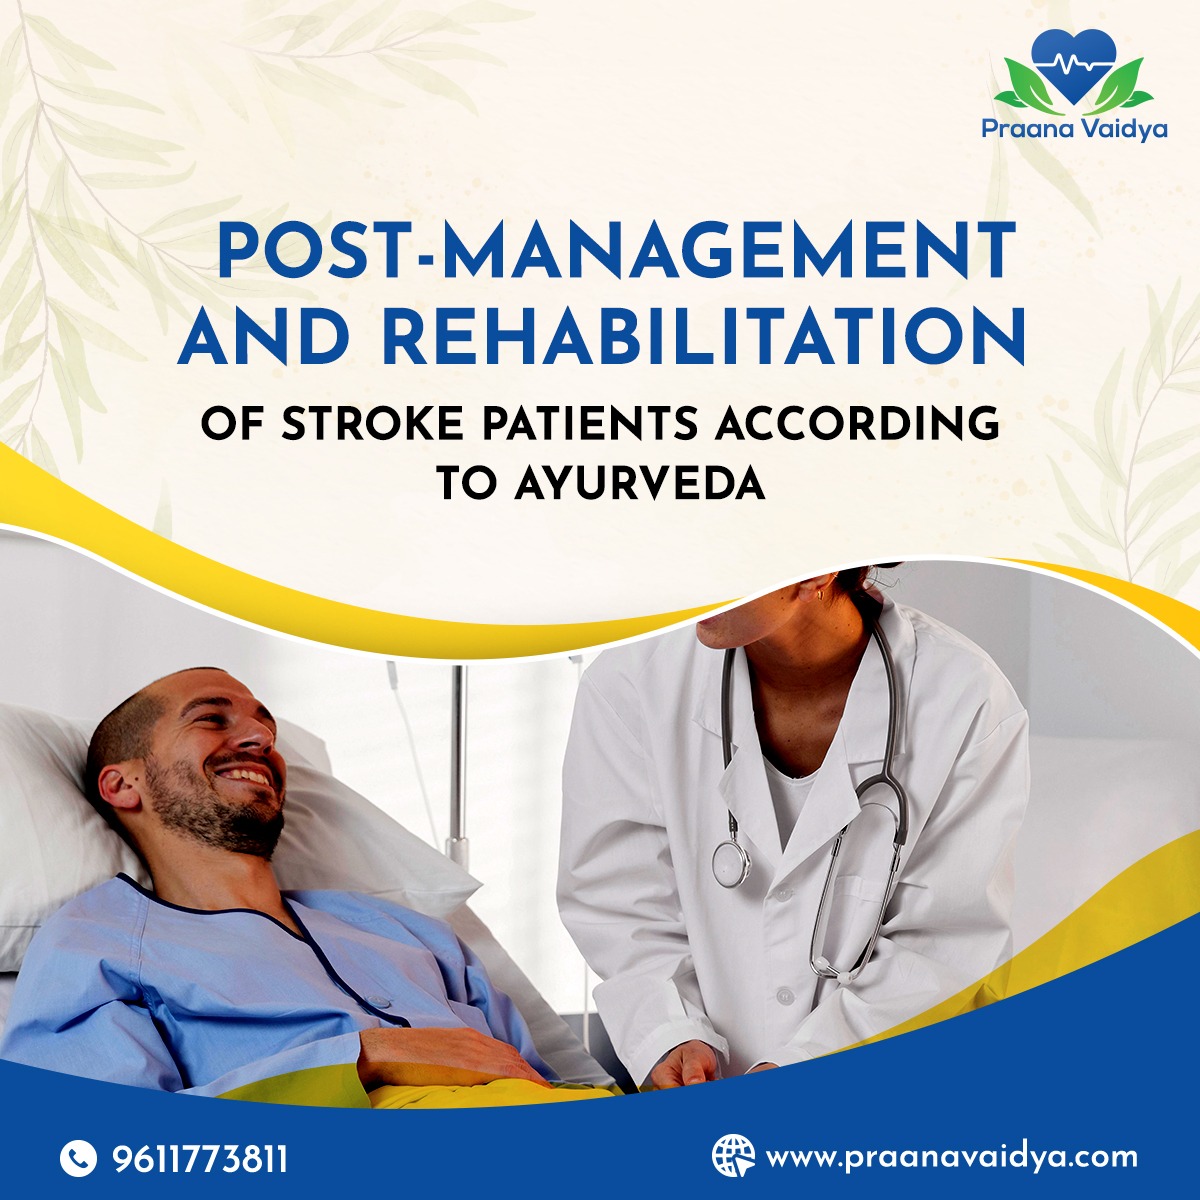 Management & Rehabilitation Of Stroke Patients According To Ayurveda